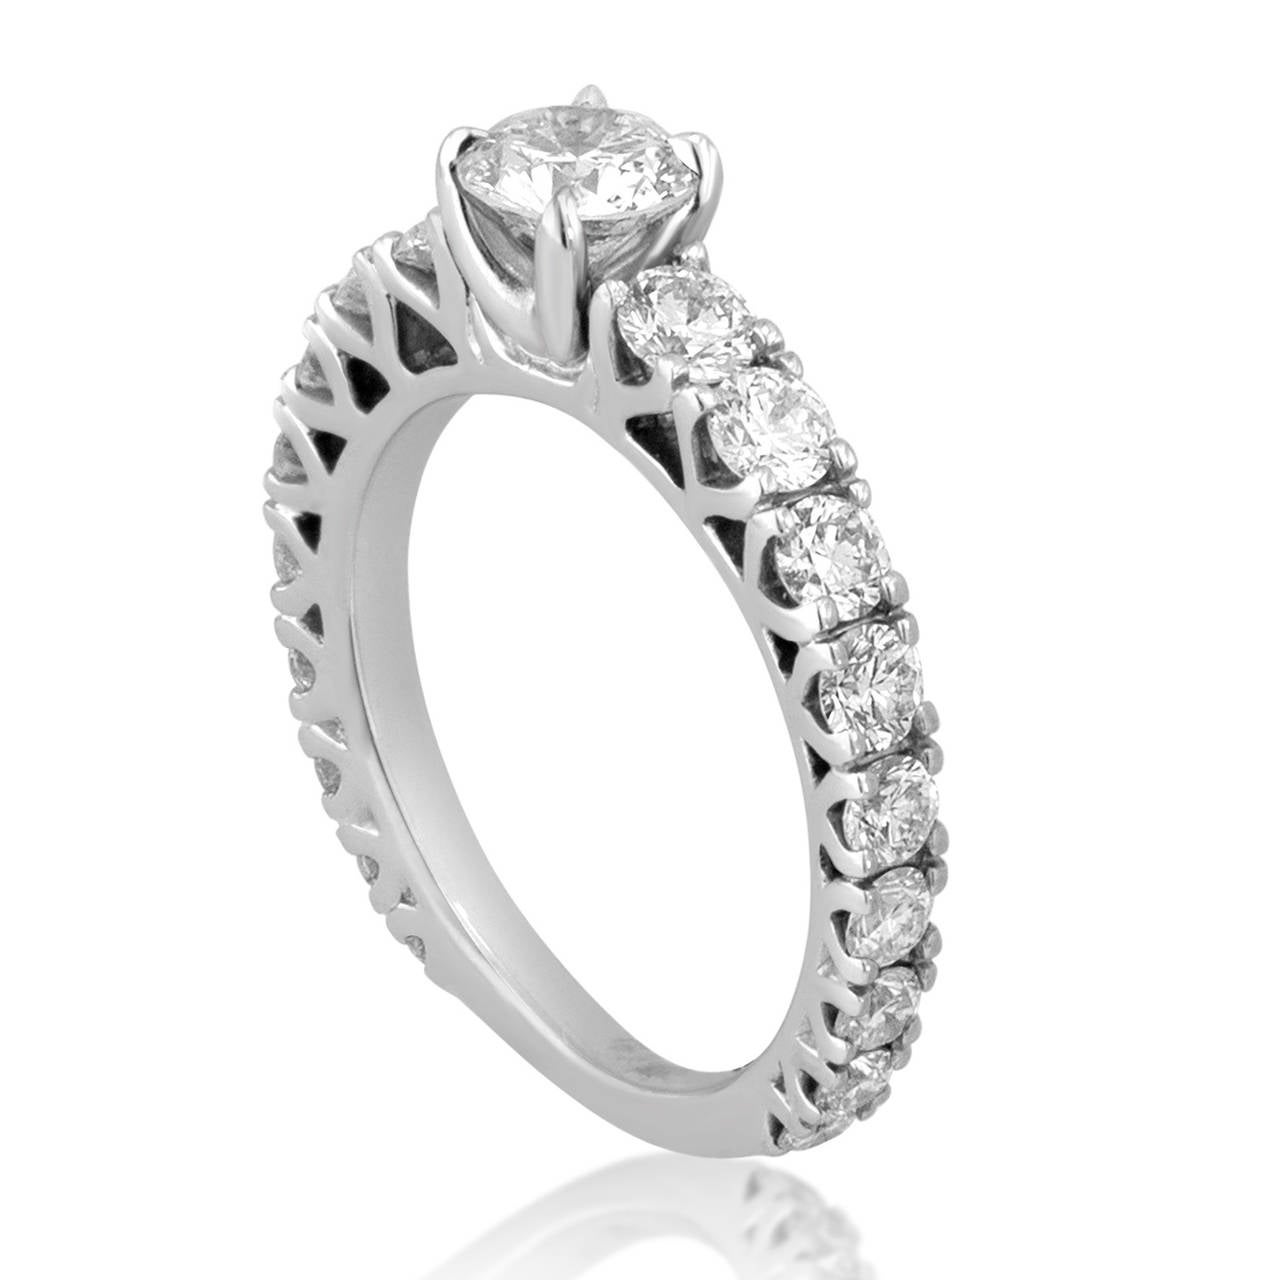 Jacob & Co. Diamond Engagement Ring.
The center stone 0.45ct F SI.
There are 1.00ct side stones G VS.
The ring is 18K White Gold.
The ring is a size 4, not sizable.
The ring weighs 3.3 grams